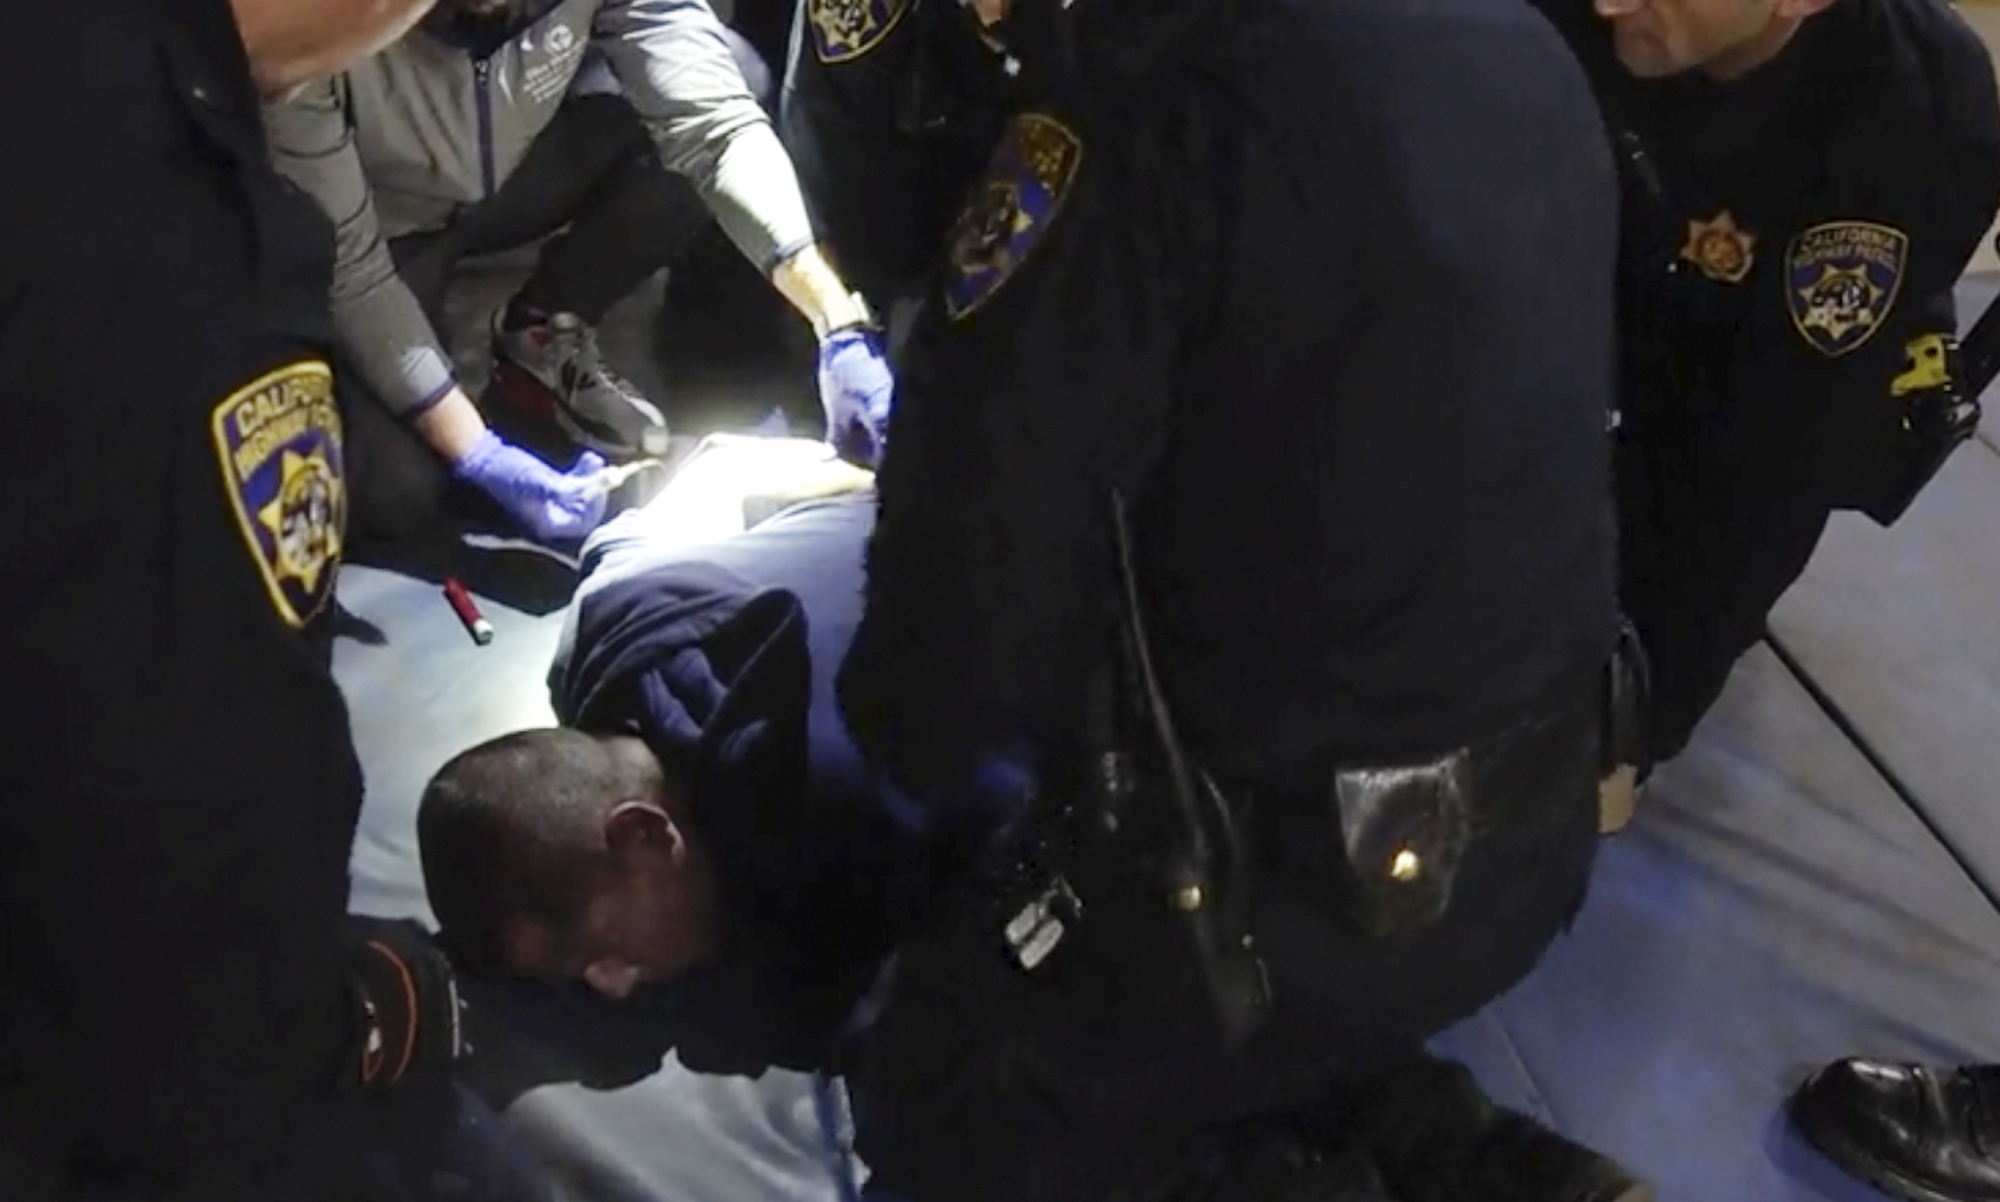 PHOTO: In this image taken from a nearly 18-minute video taken by a California Highway Patrol sergeant, Edward Bronstein, 38, is taken into custody by CHP officers on Mar. 31, 2020, following a traffic stop in Los Angeles.